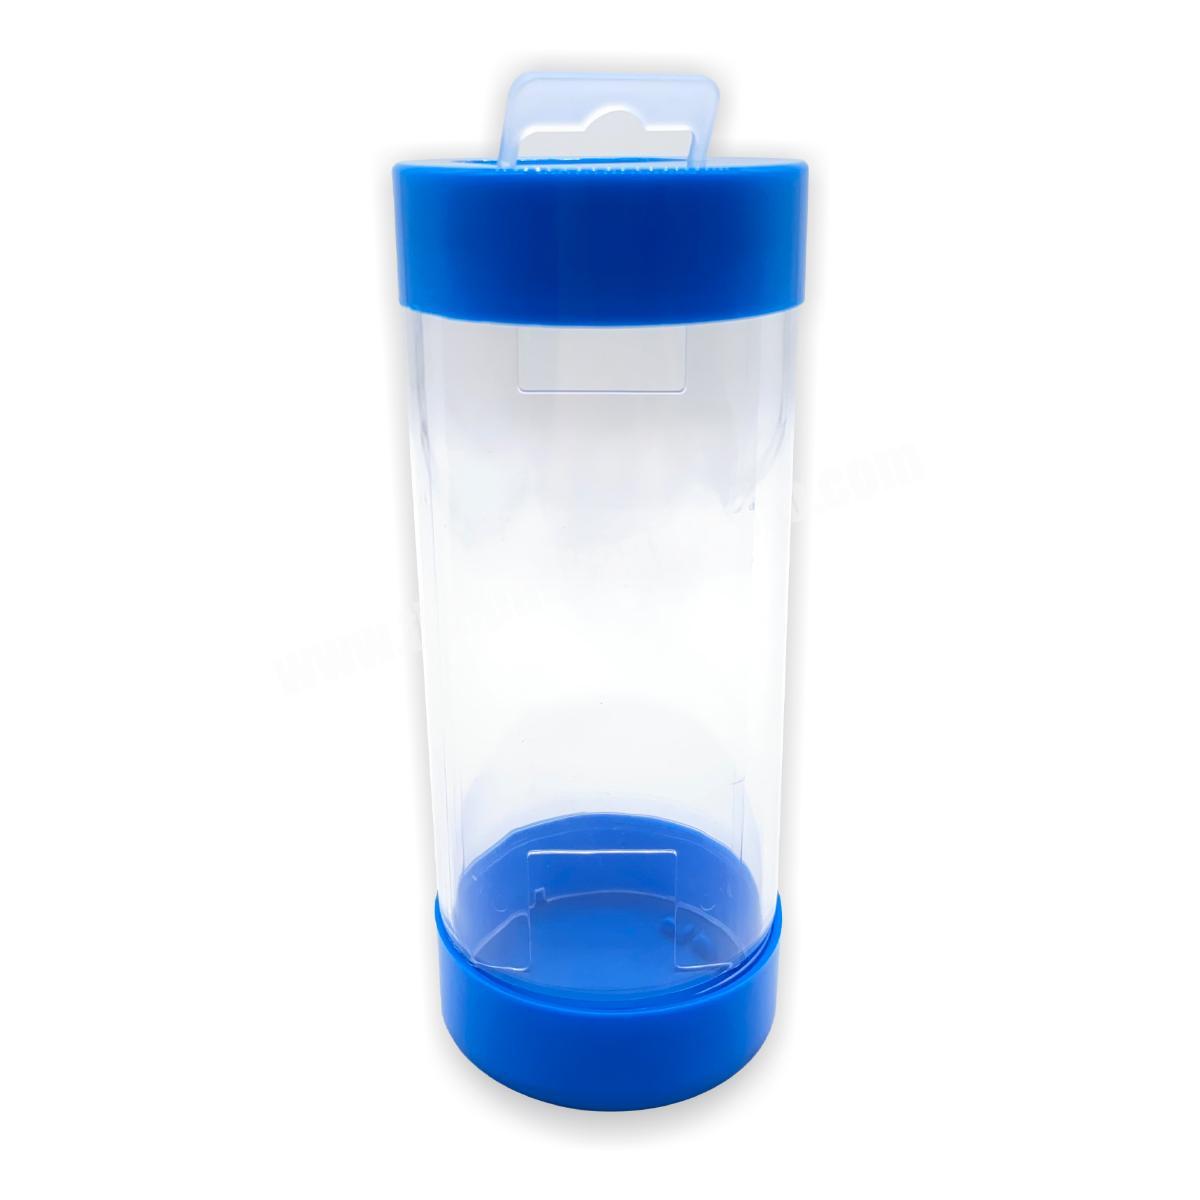 Cylinder Transparent Watch box Blue Top Cover Watch Gift Box